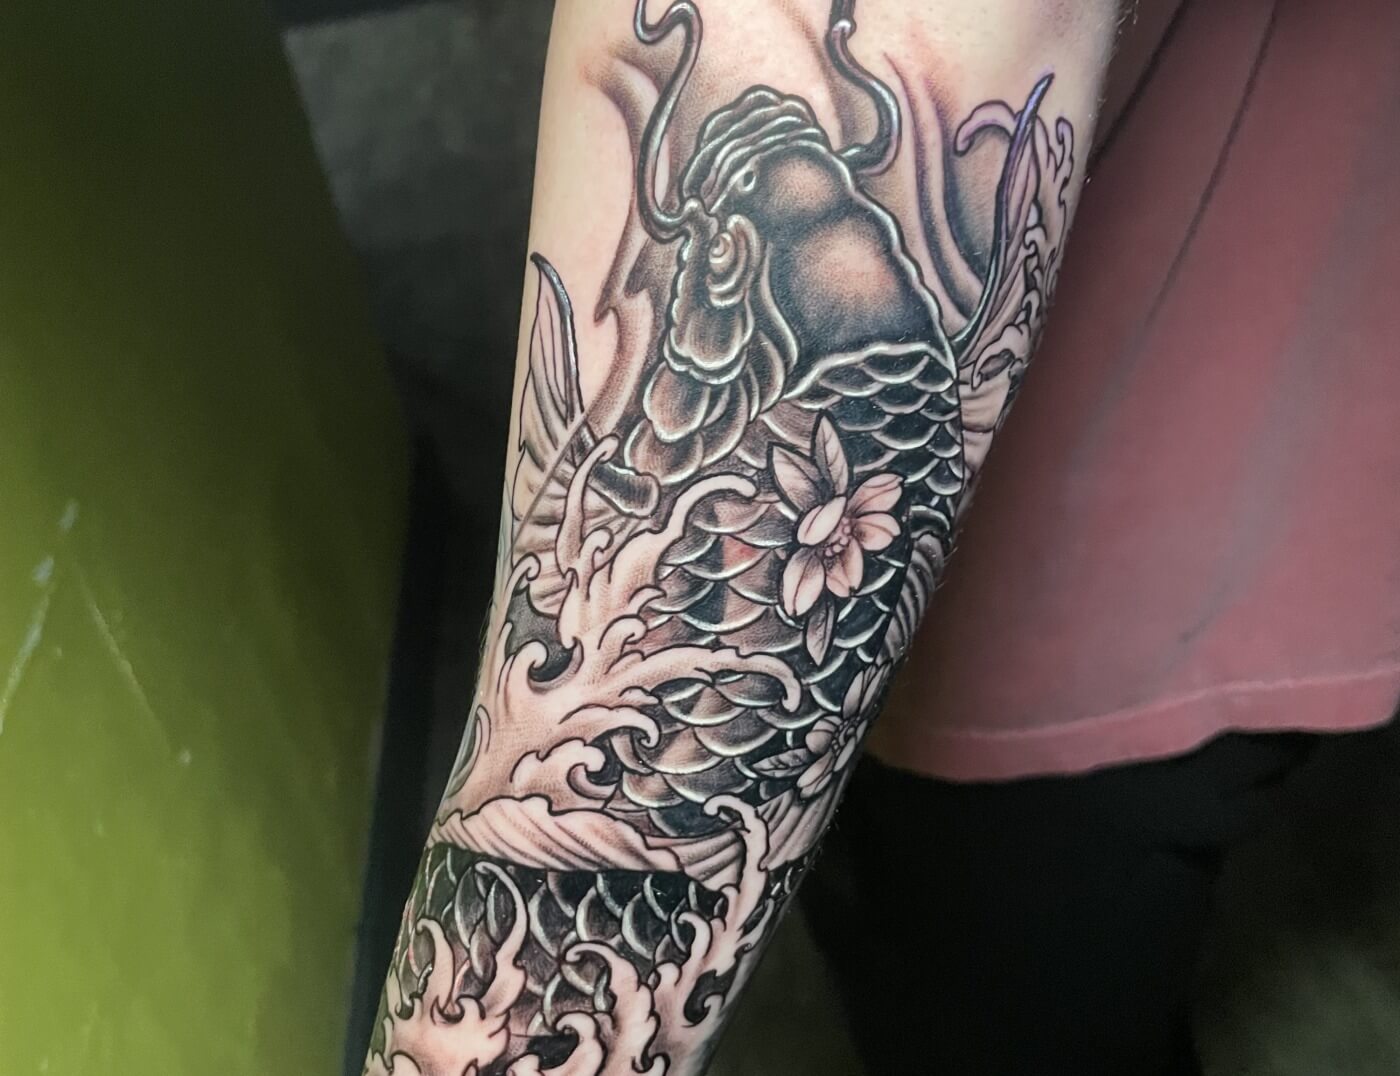 Haku Dragon with Cherry Blossom Black & Gray Sleeve by Terrance Sawyer at Iron Palm Tattoos In Atlanta. Haku & Cherry blossom tattoos are popular in Japanese culture and has its roots in the Samurai love of nature. Call 404-973-7828 or stop by for a free consultation. Walk Ins are welcome.